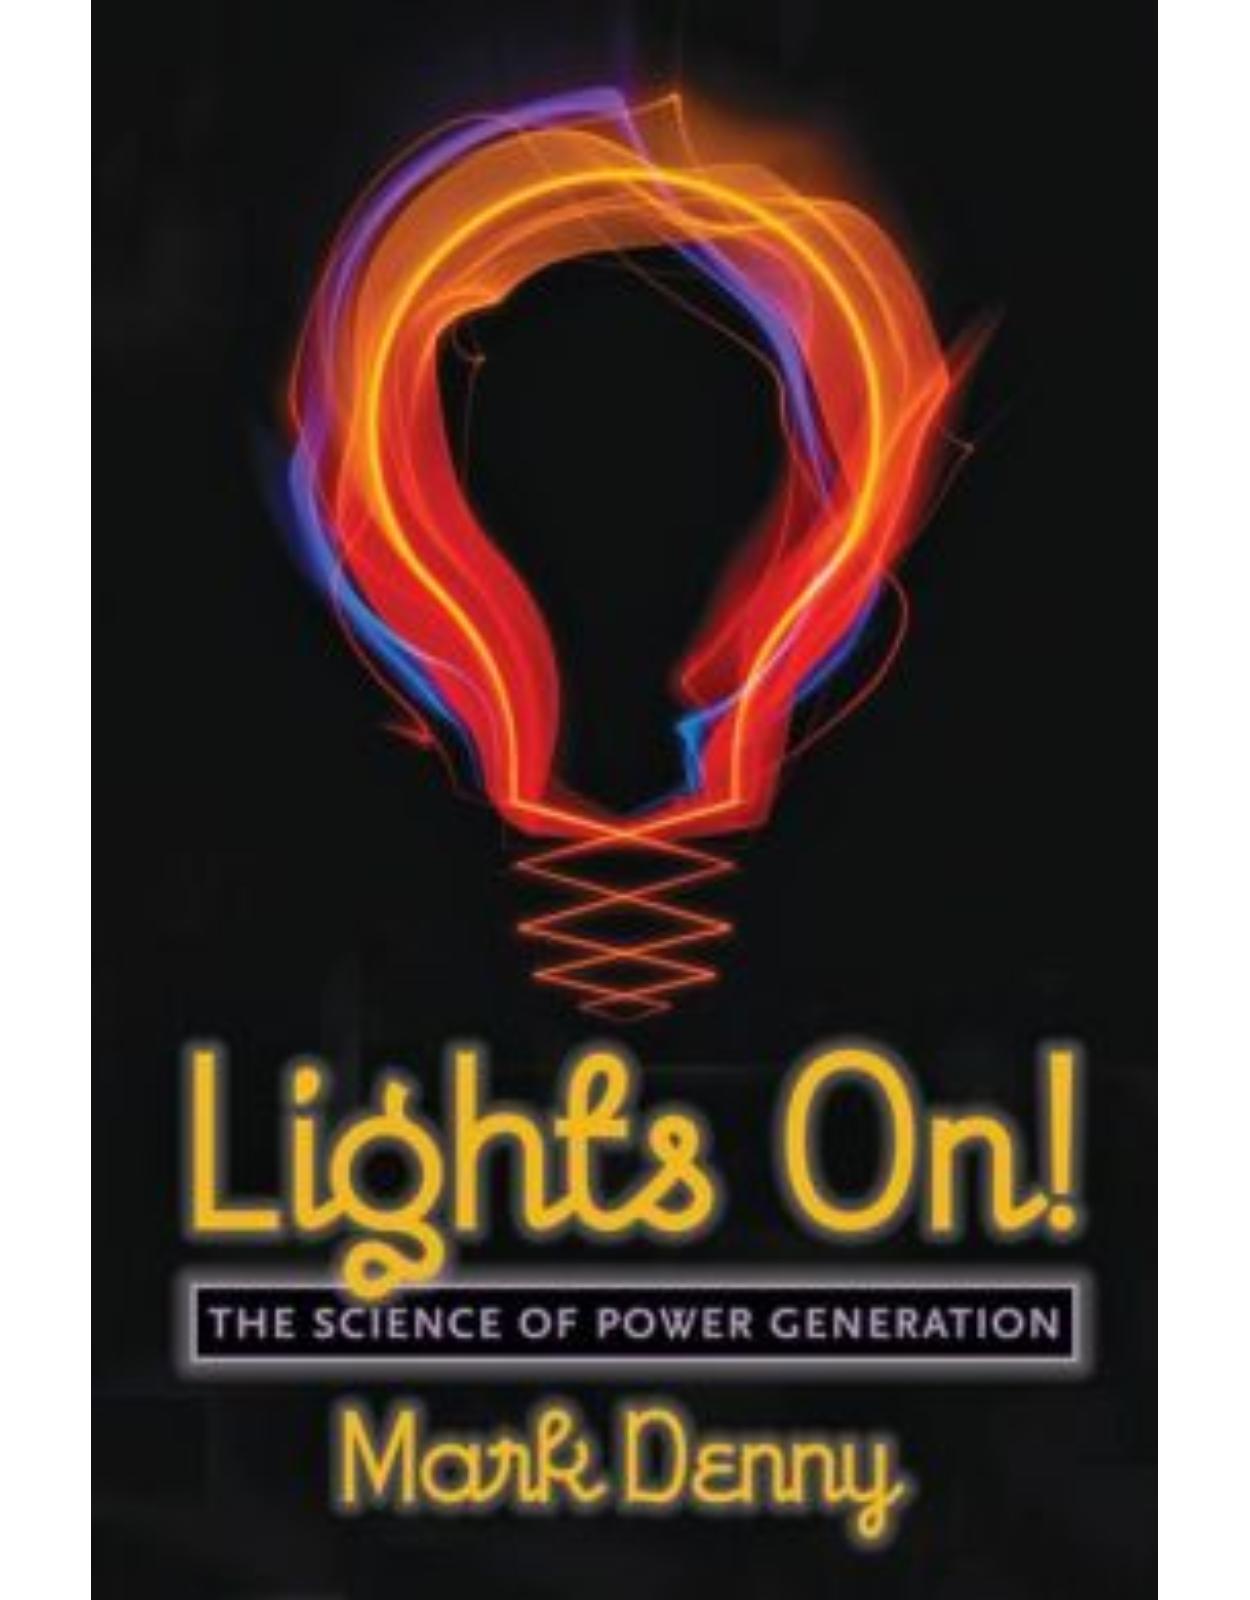 Lights On!. The Science of Power Generation